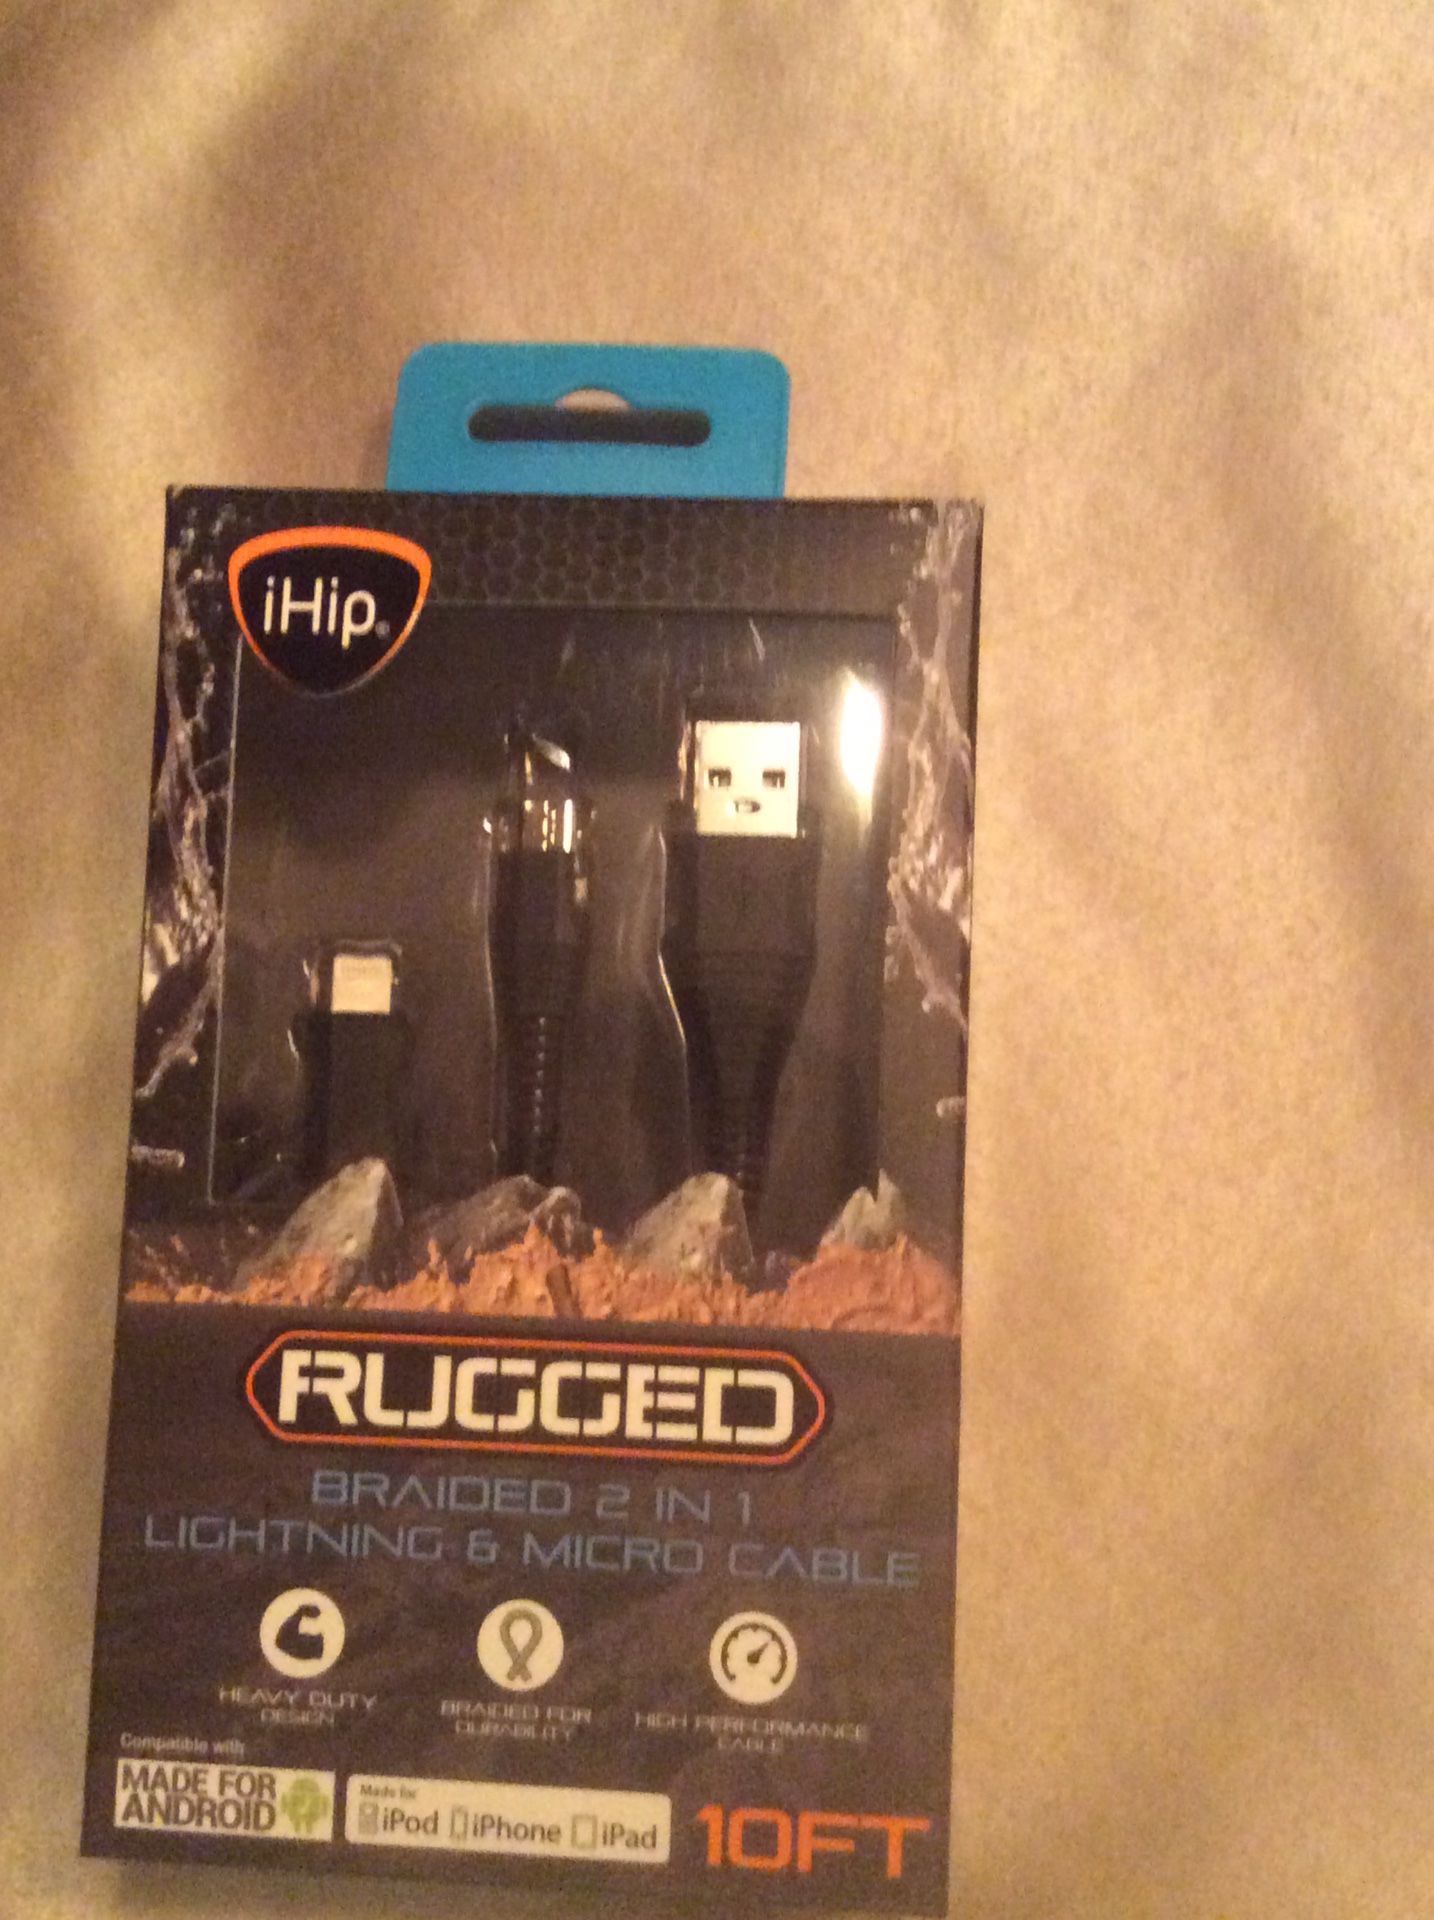 I-Hip Rugged Braided 2 IN 1 Lighting Cable -10ft